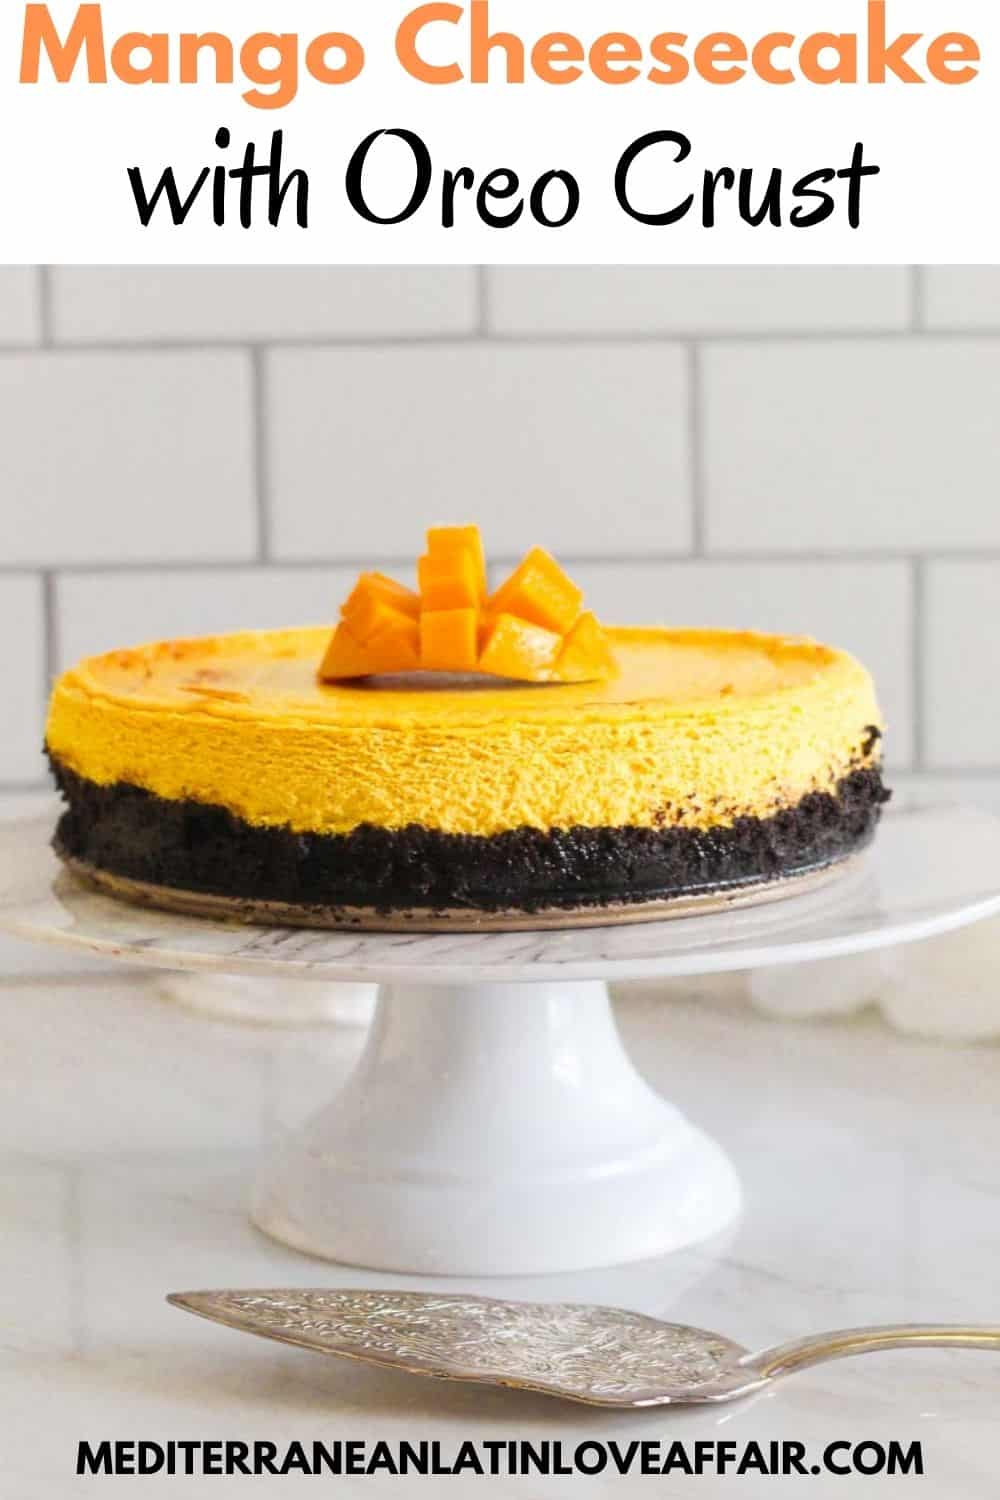 An image prepared for Pinterest, it shows the mango oreo cheesecake in the center of the image served on a white cake stand. On top of the picture there's a title bar and at the bottom a website link.